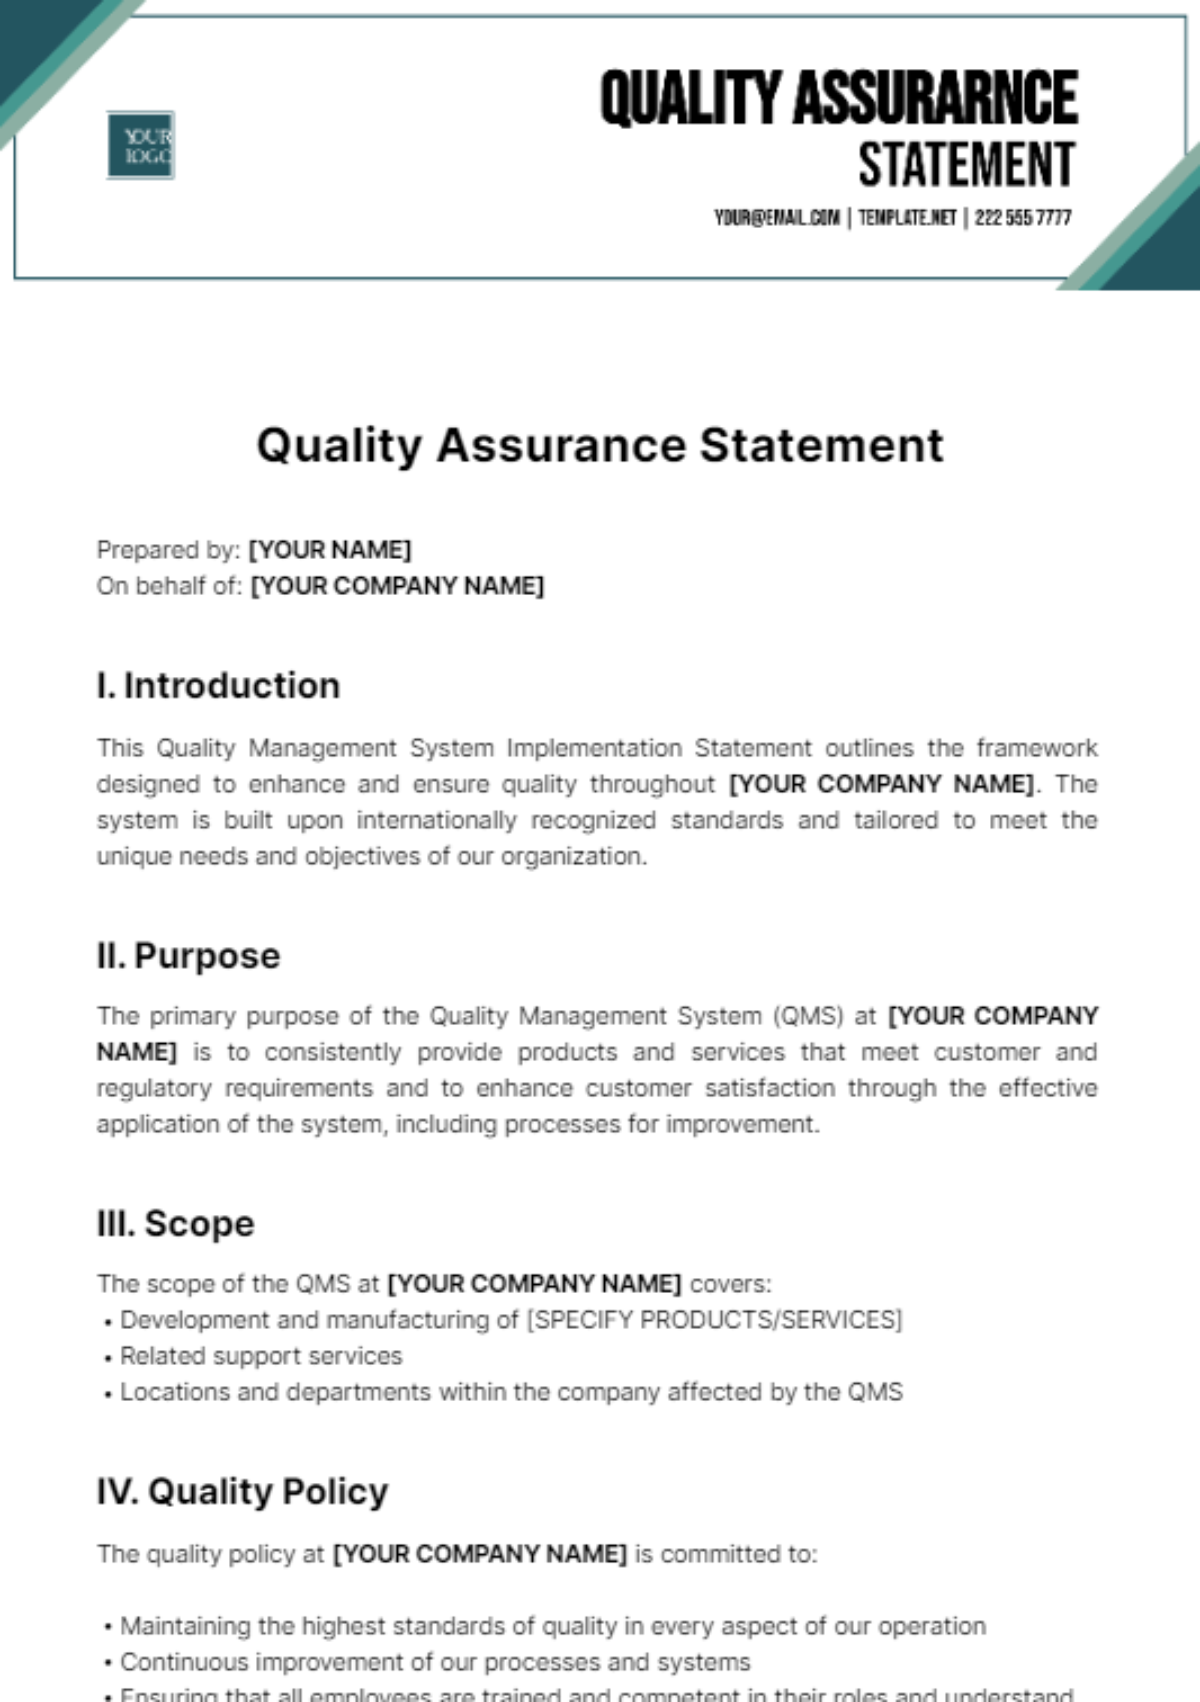 Quality Assurance Statement Template